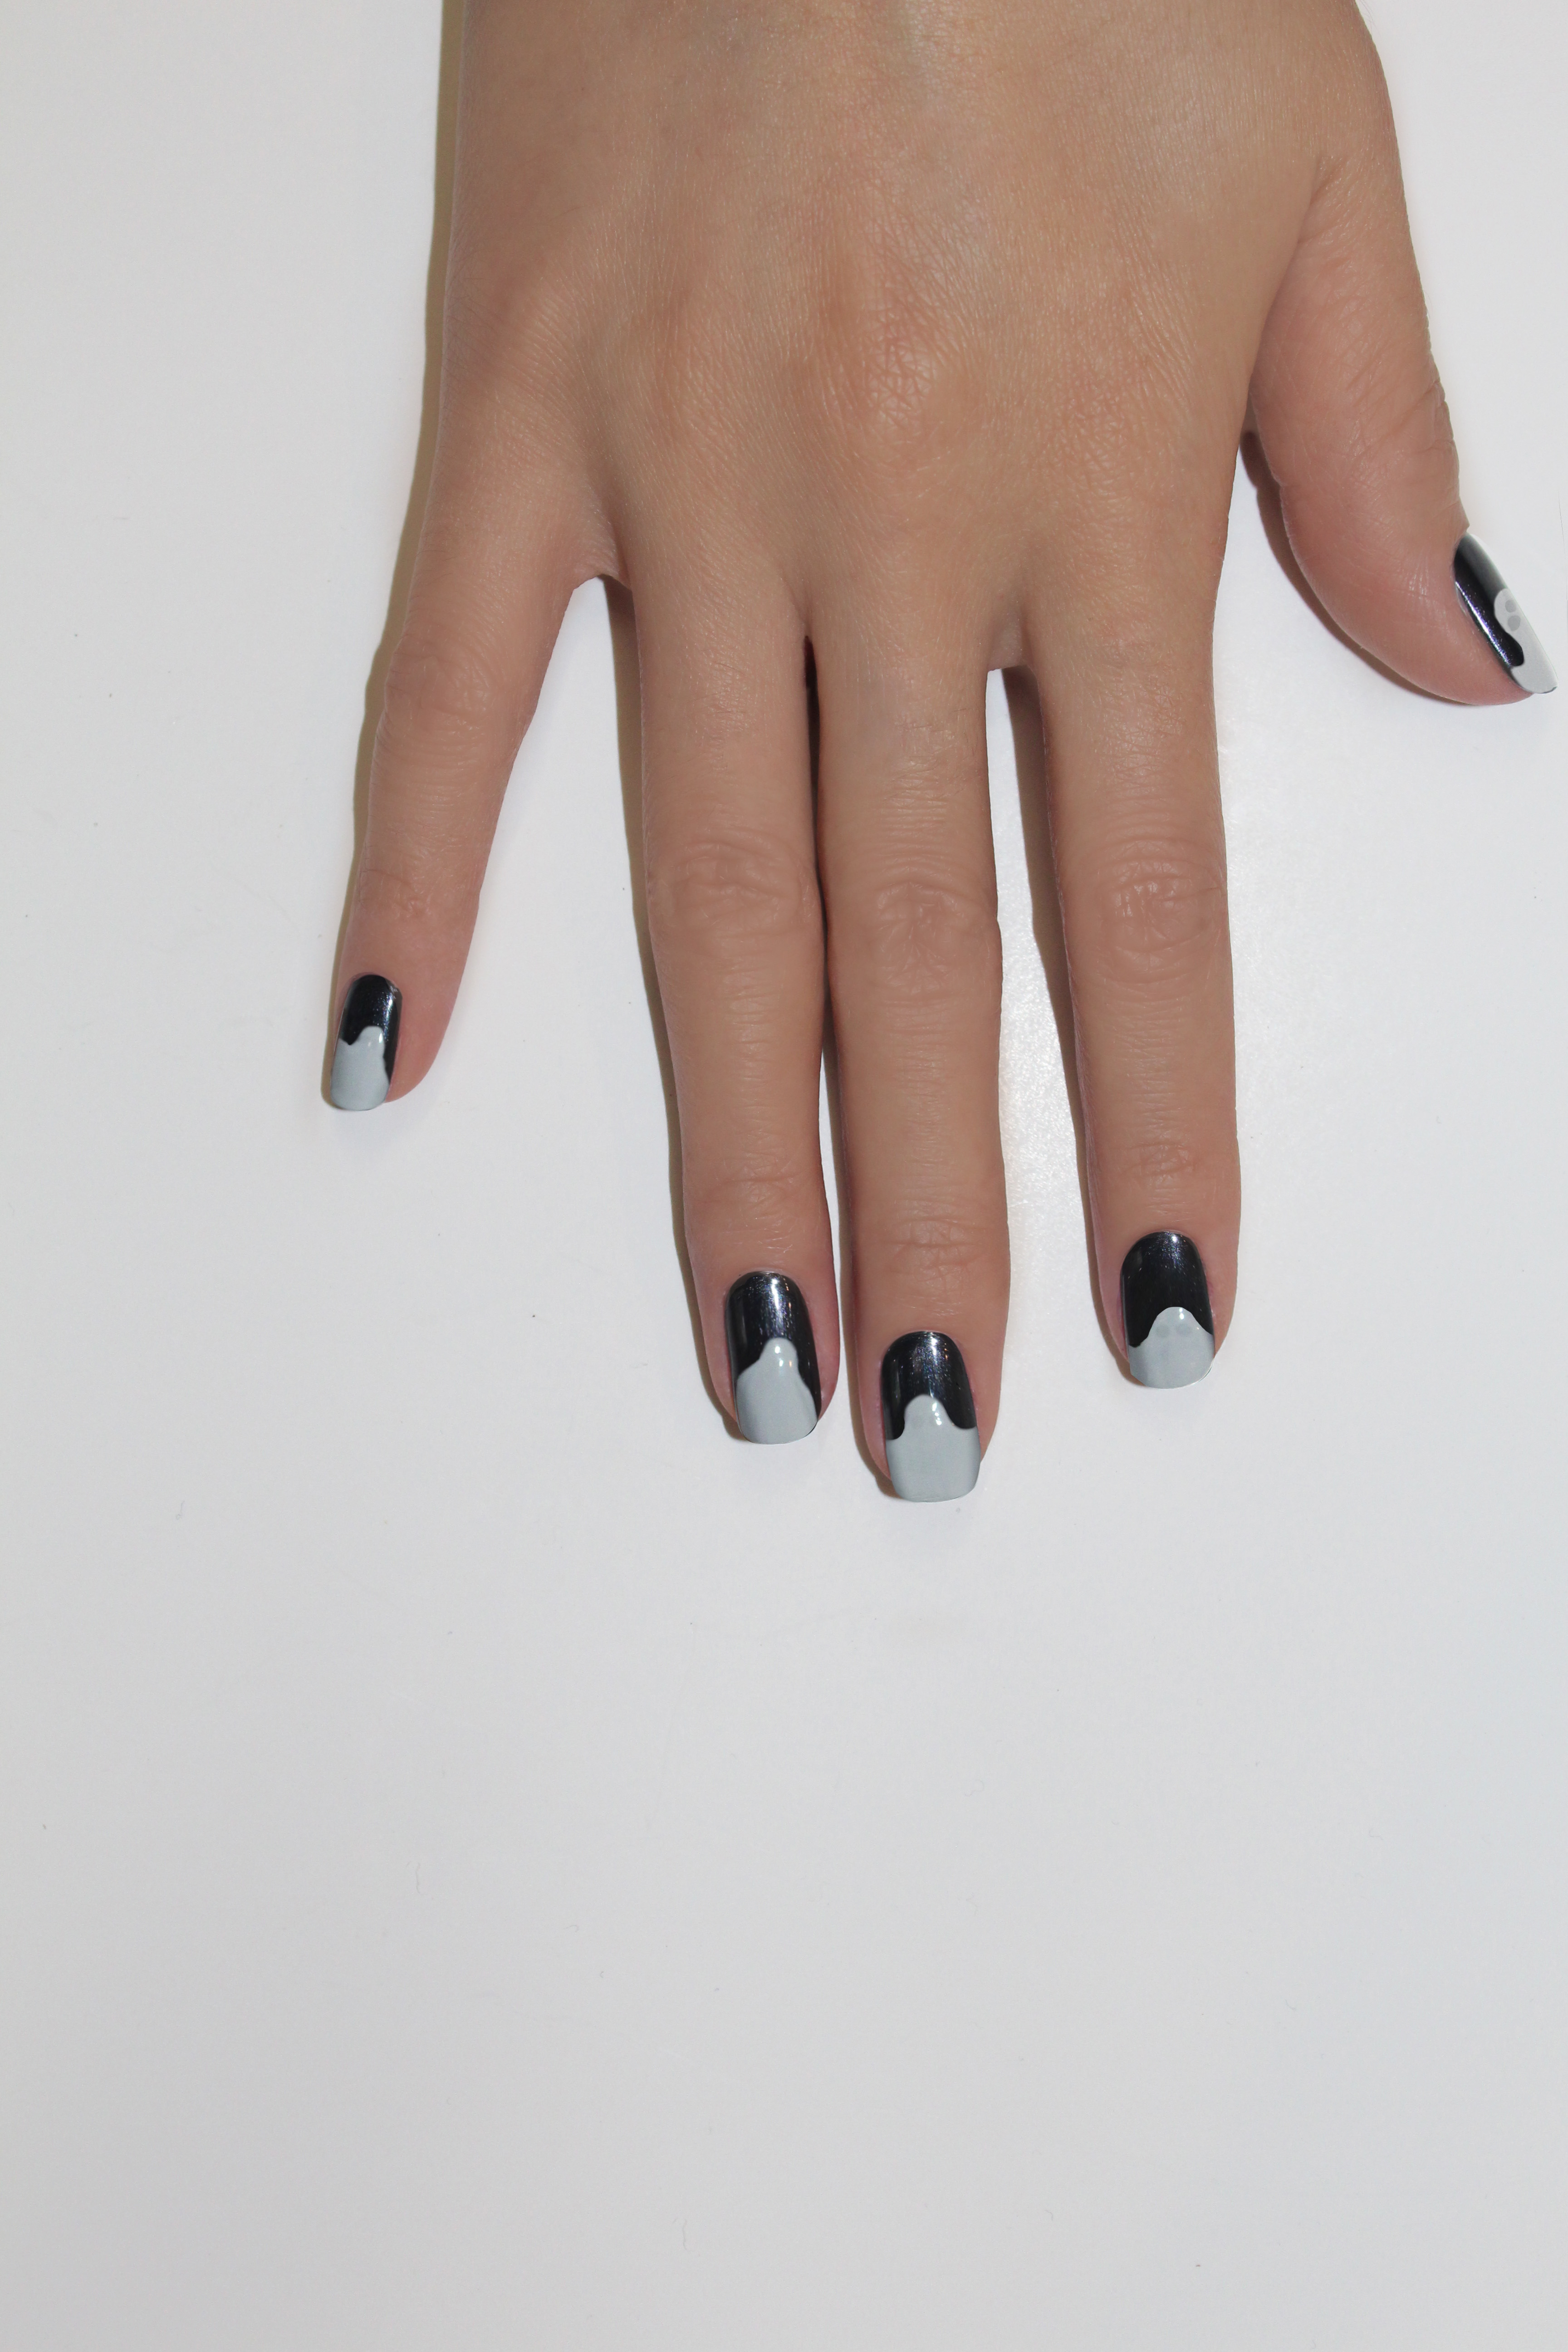 Download Halloween Nail Art With Ghosts How To Get The Design Stylecaster